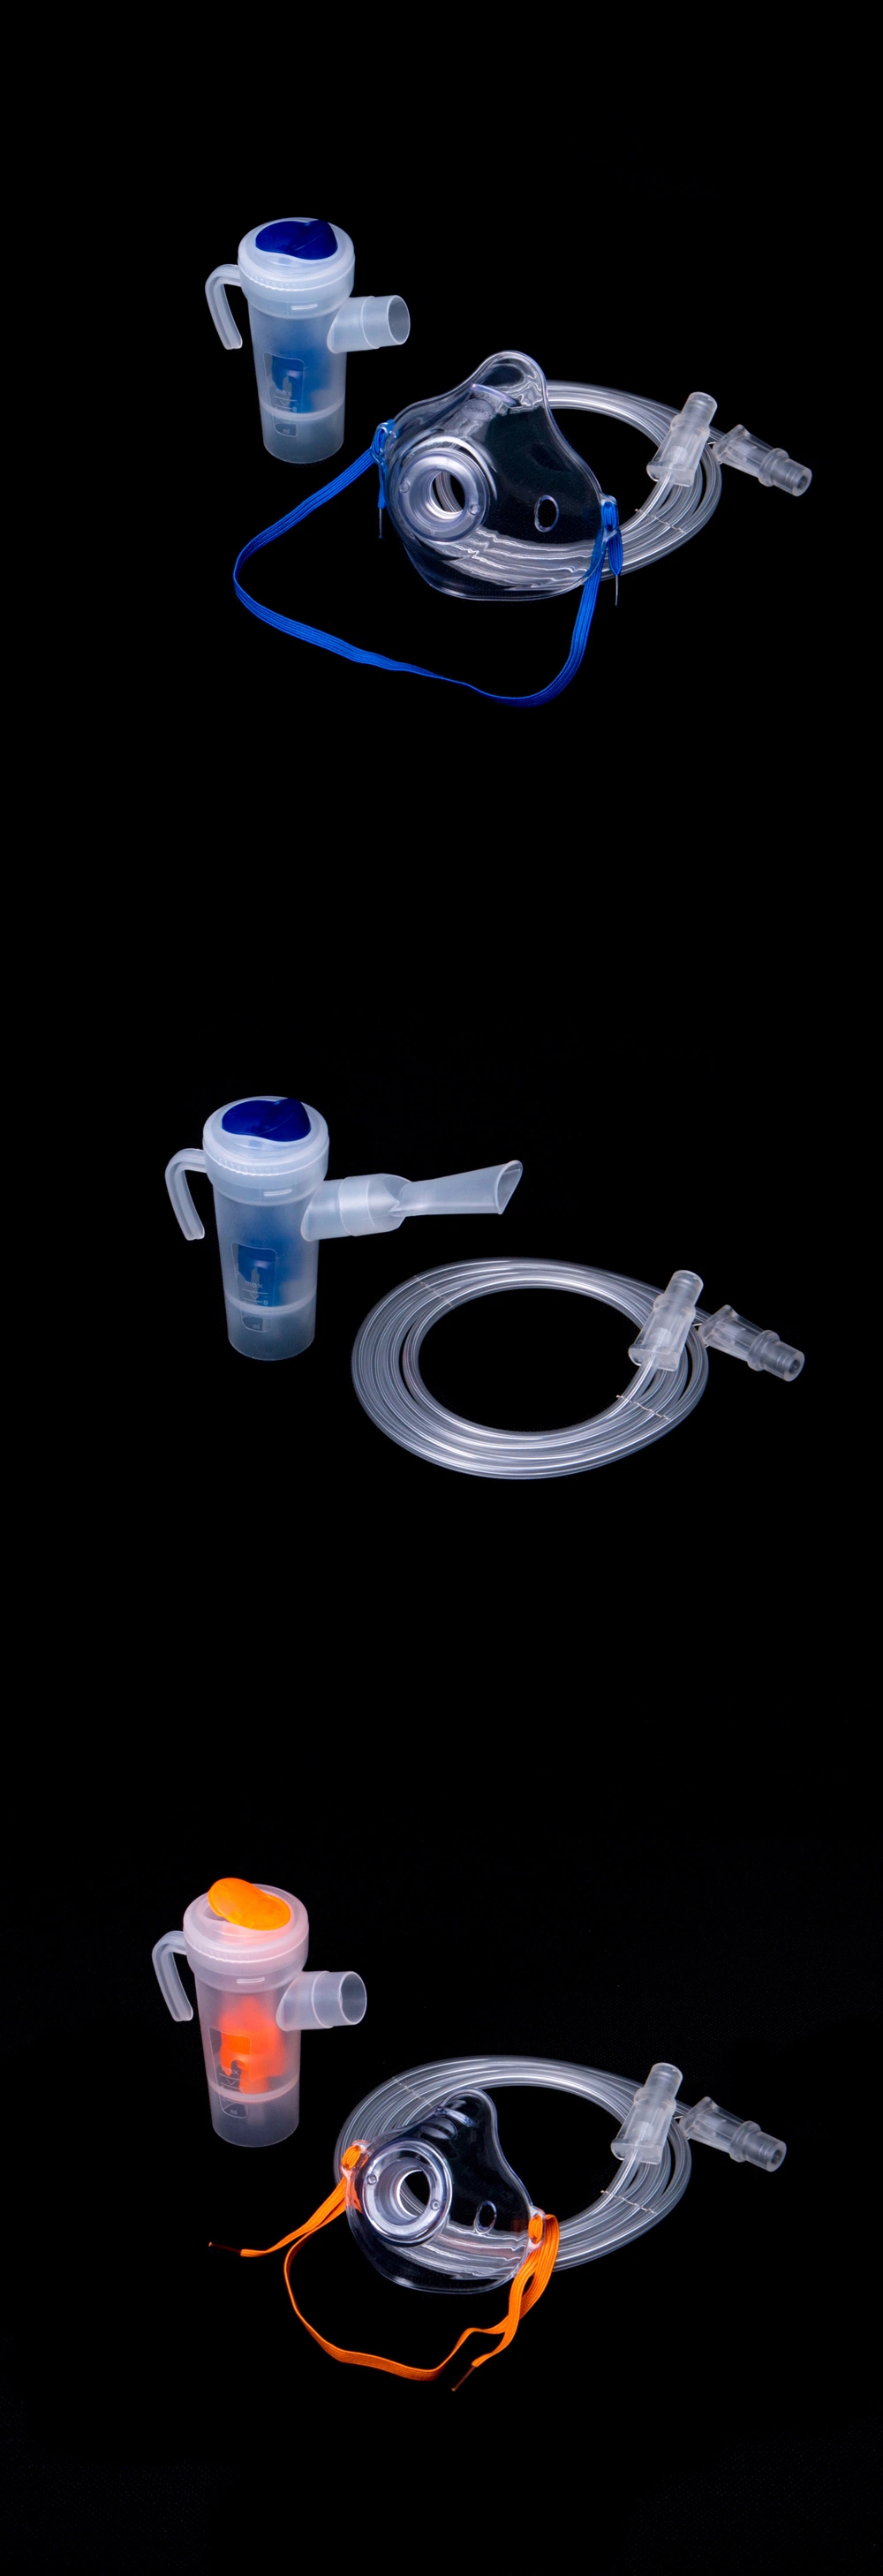 Sterile Medical Nebulizer Set Nebulizer with Button Kit Nebulizer Chamber Nebulizer Cup Nebulizer Oxygen Kit with Mask for Adult/Children with CE ISO